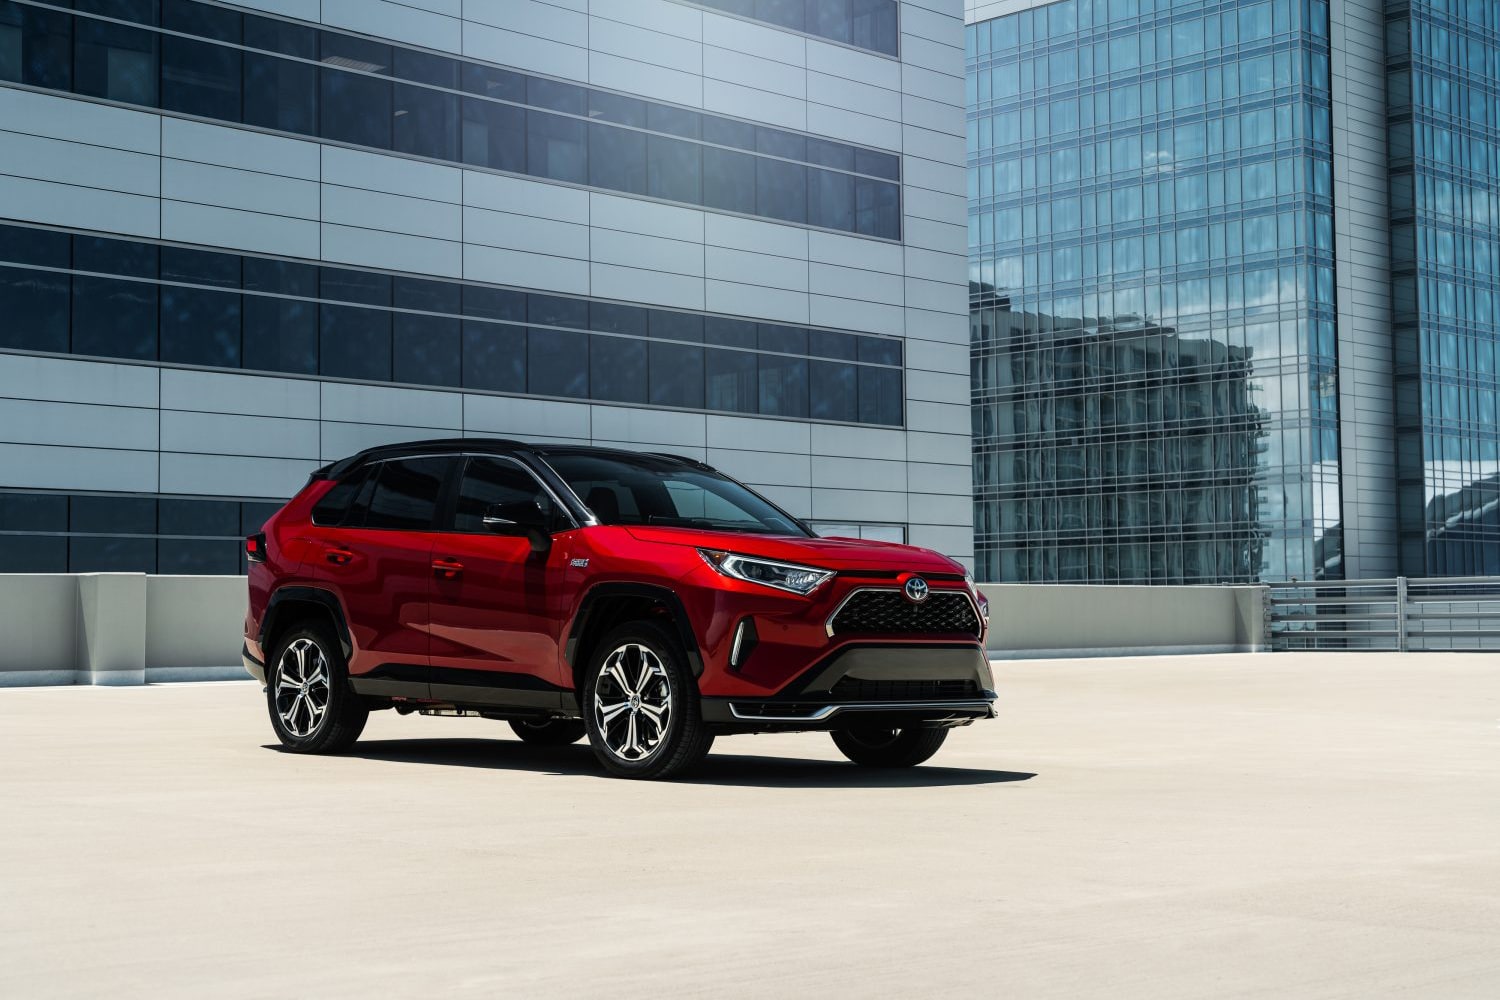 Toyota began selling the quickest and most fuel-efficient RAV4 Prime.